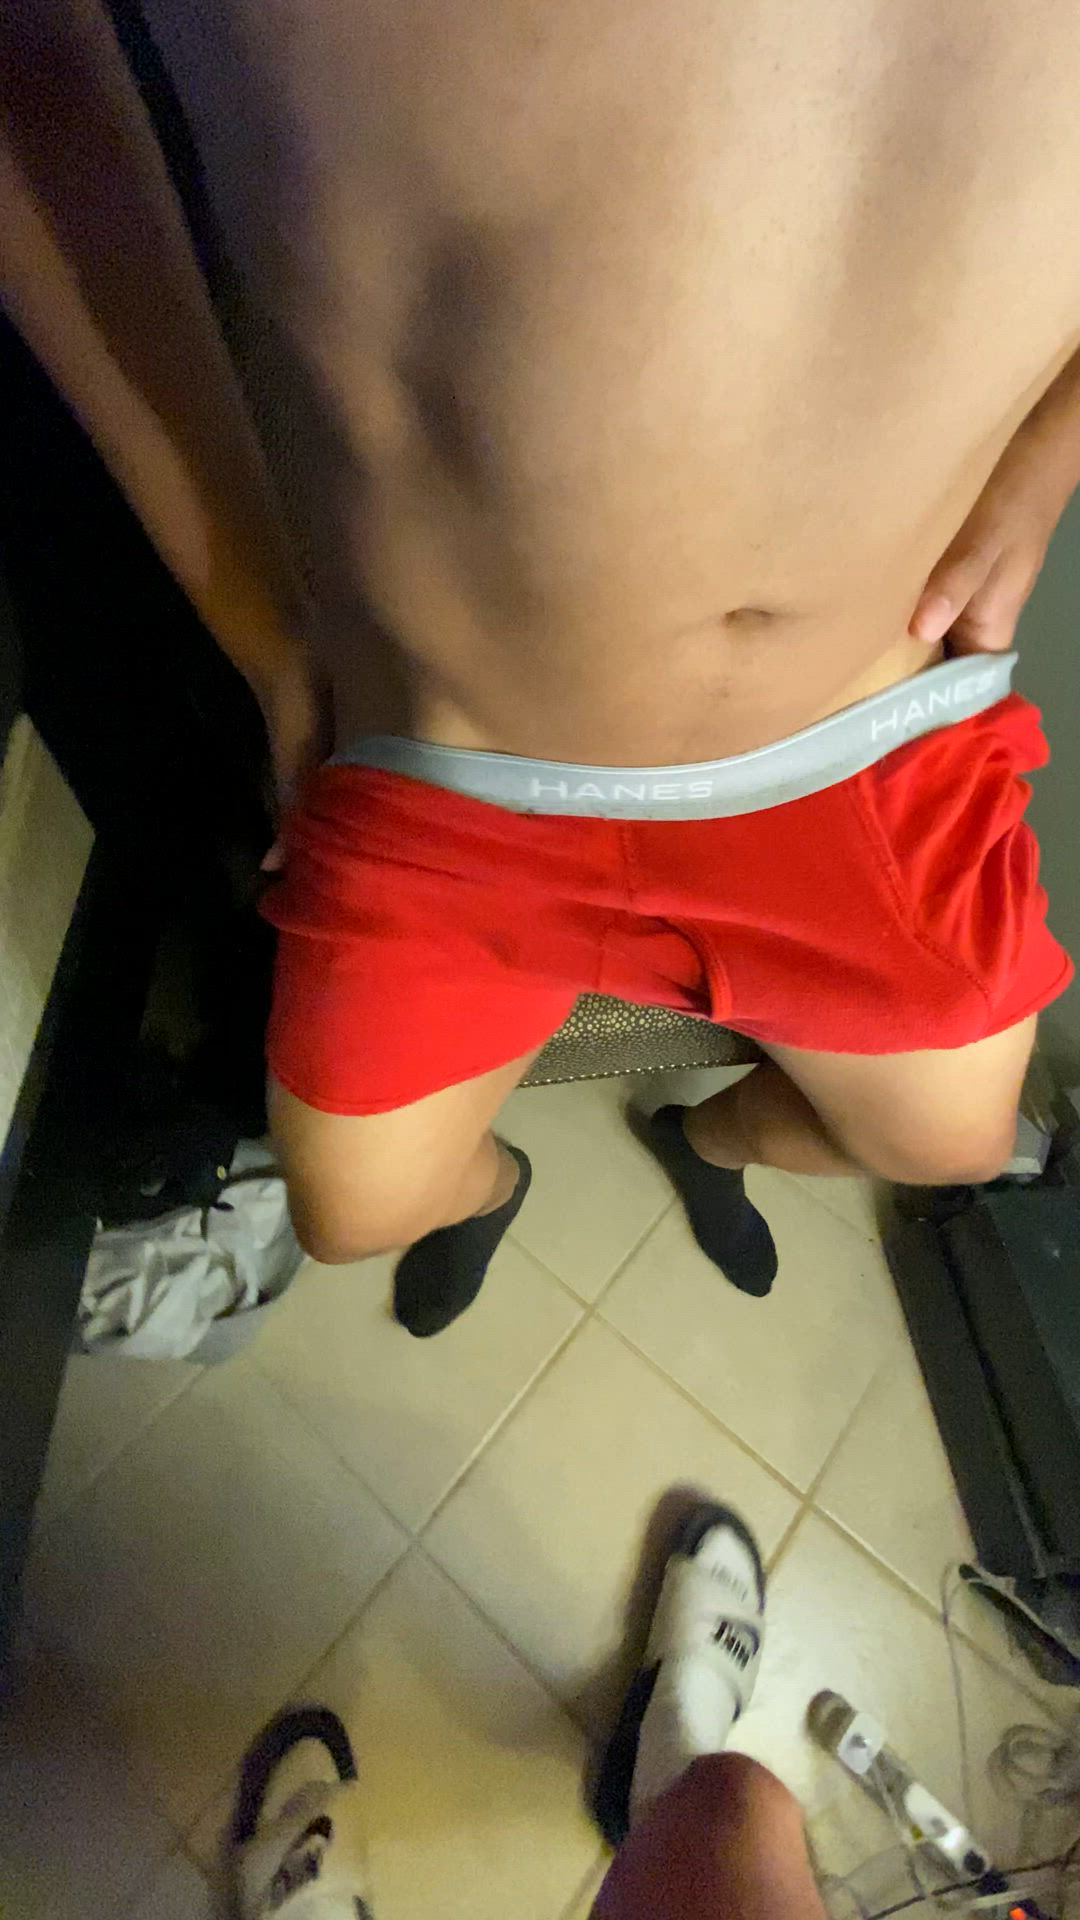 Amateur porn video with onlyfans model jayraw20 <strong>@jayraw20</strong>